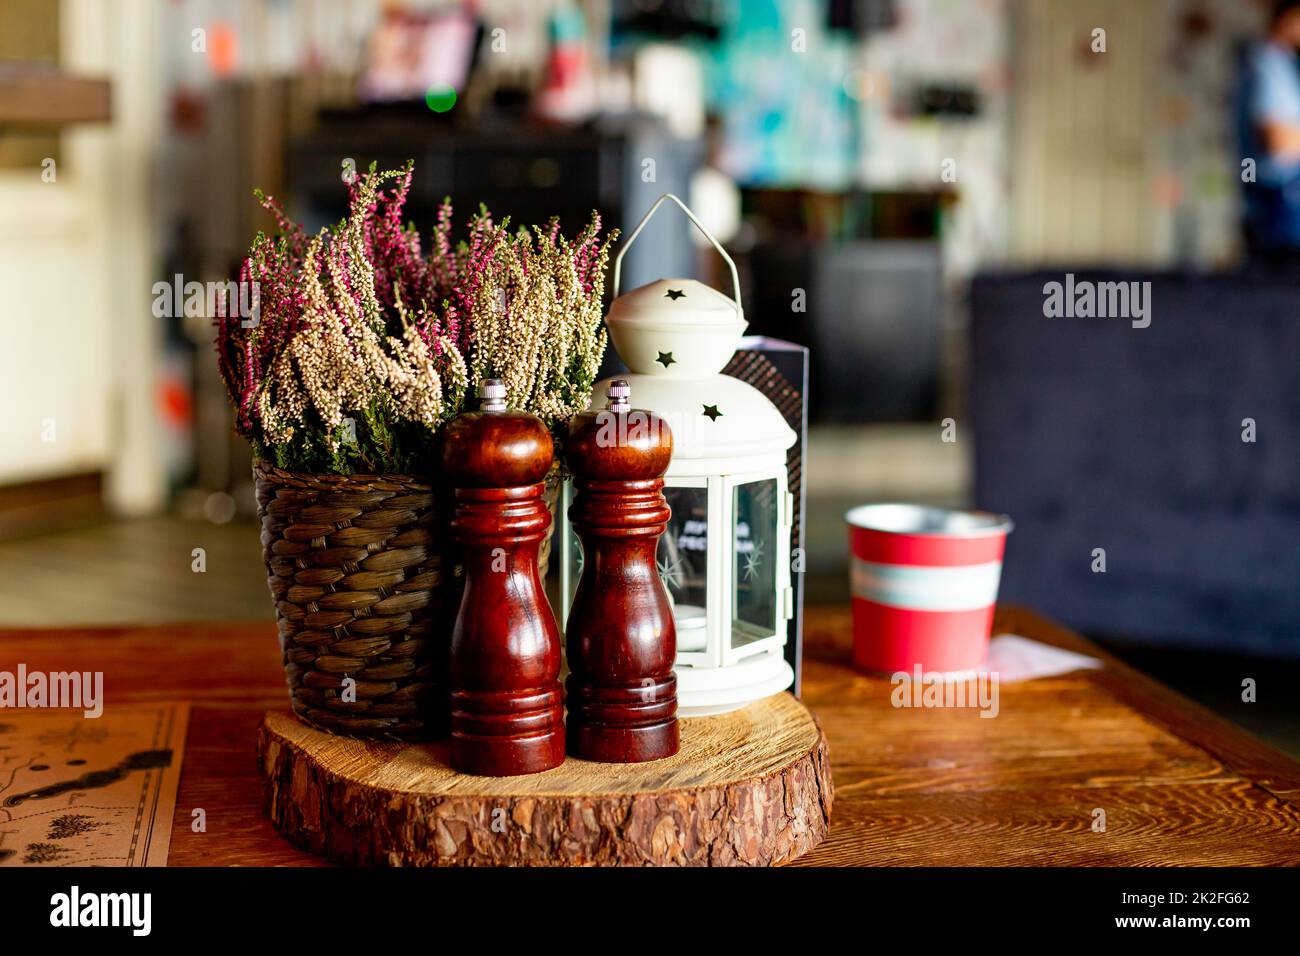 Wooden traditional salt and pepper shakers in cafe,selective focus.Still life details of cozy interior in rustic style.Wooden spices shakers, mills Stock Photo